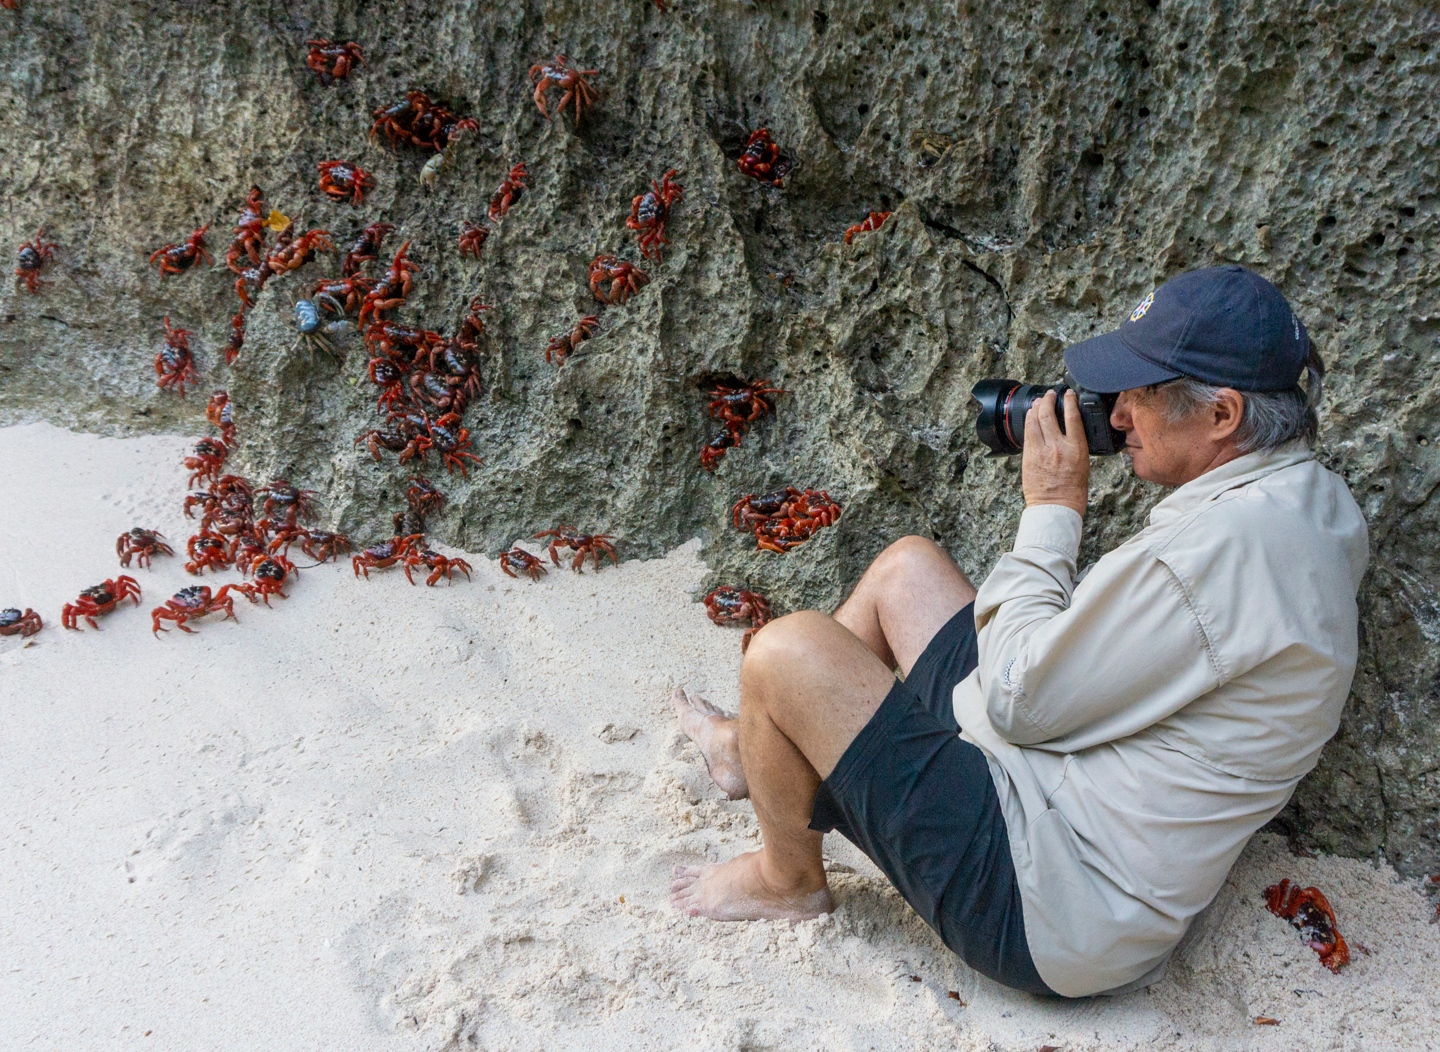 Red crab migration being photographed during migration on Christmas Island beach near Swell Lodge